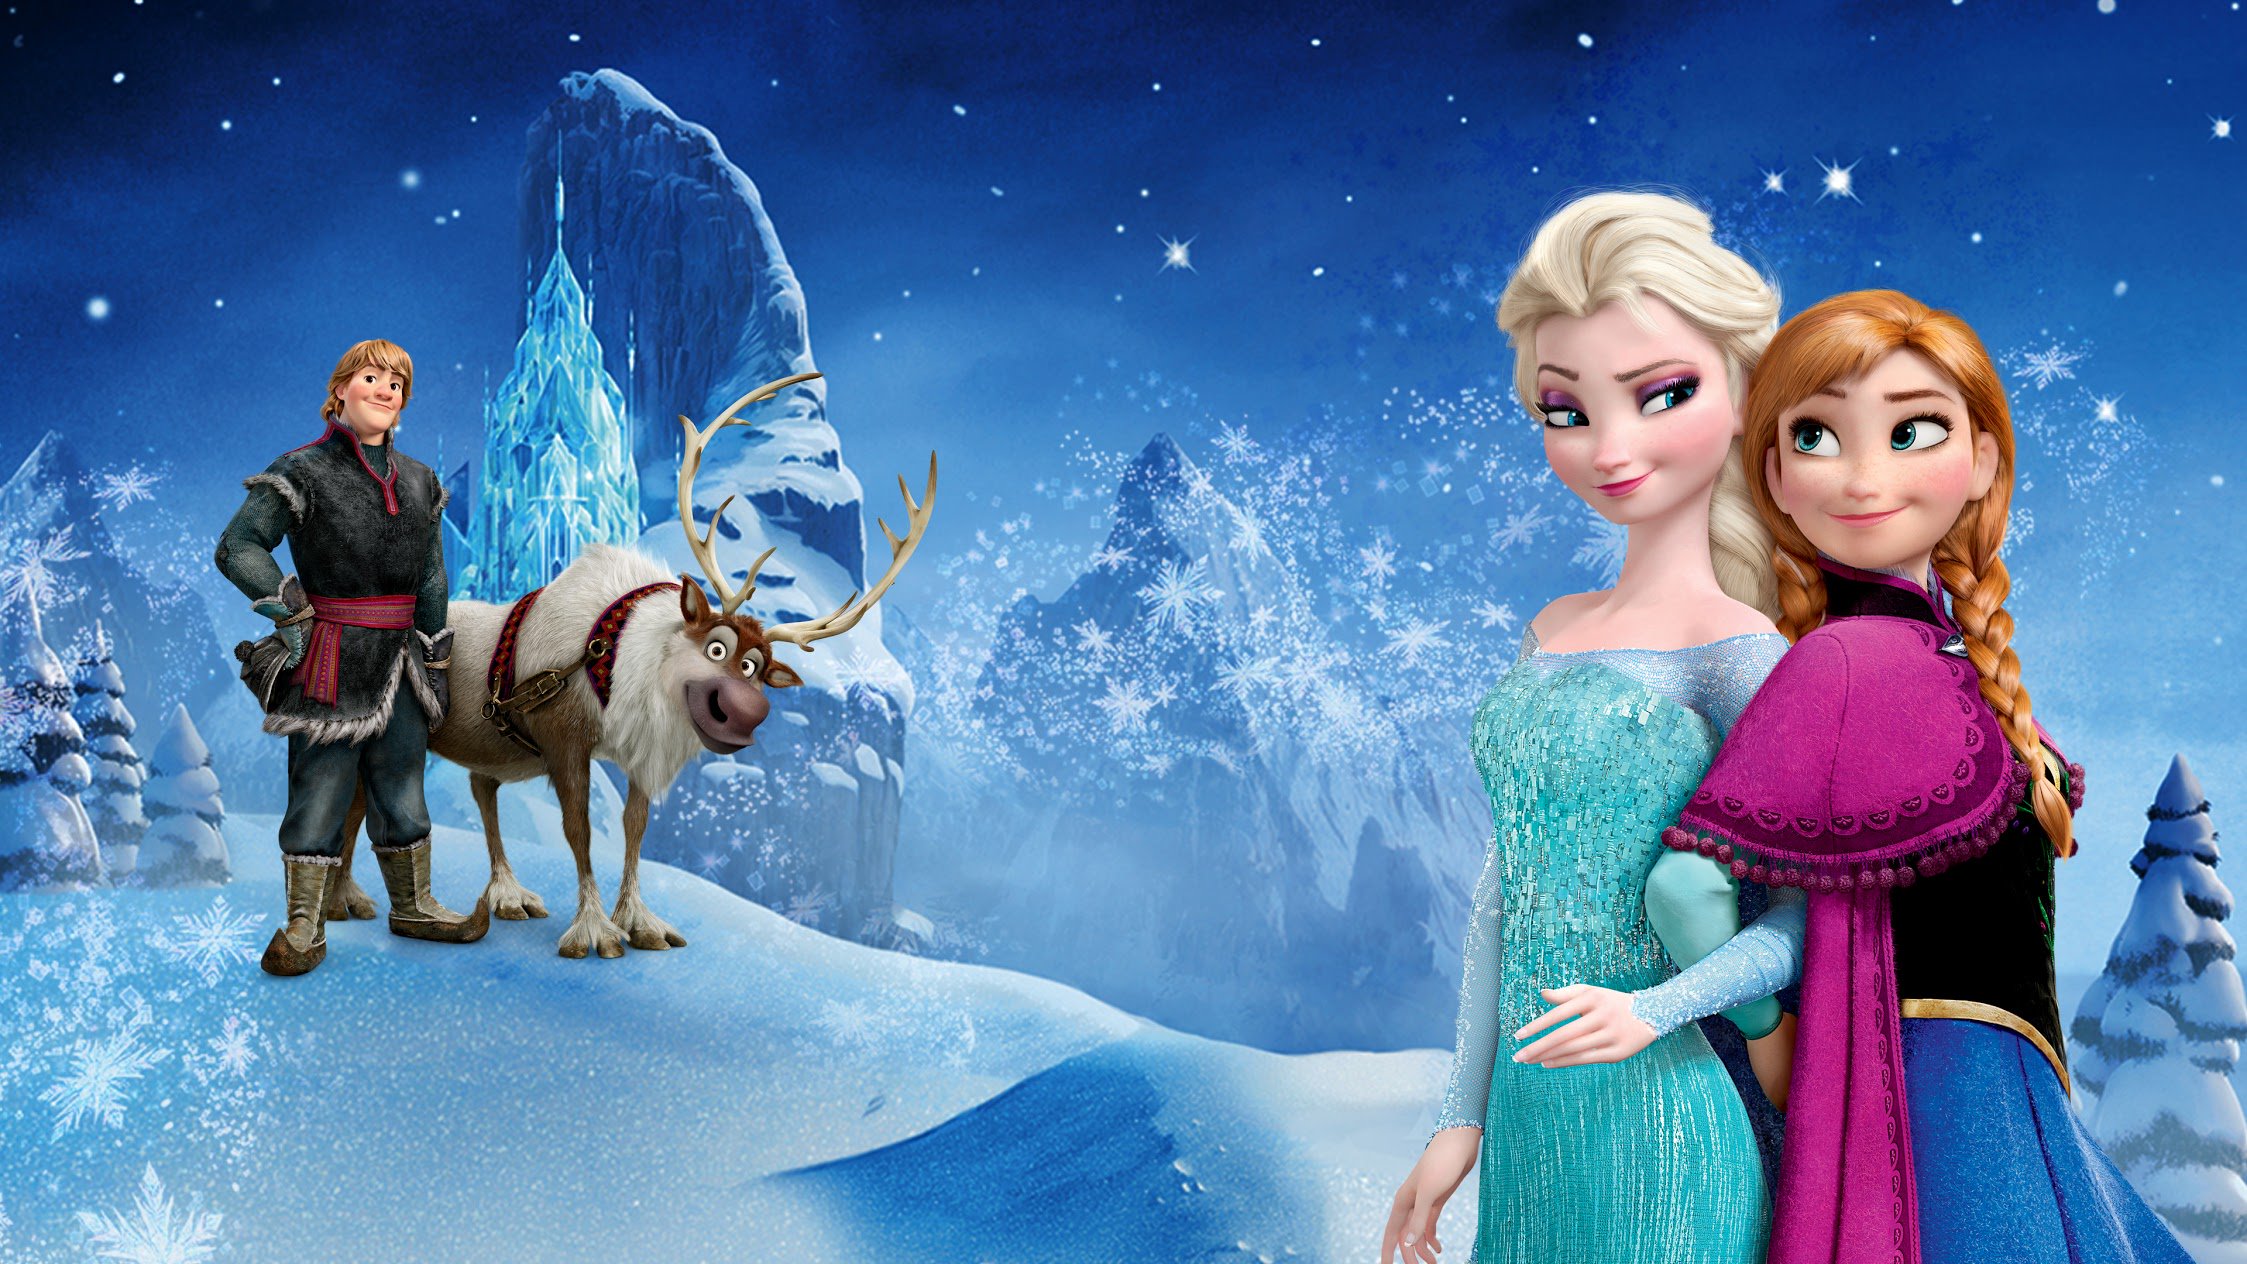 Disney's Frozen: The Surprising Christian Story Behind the Movie